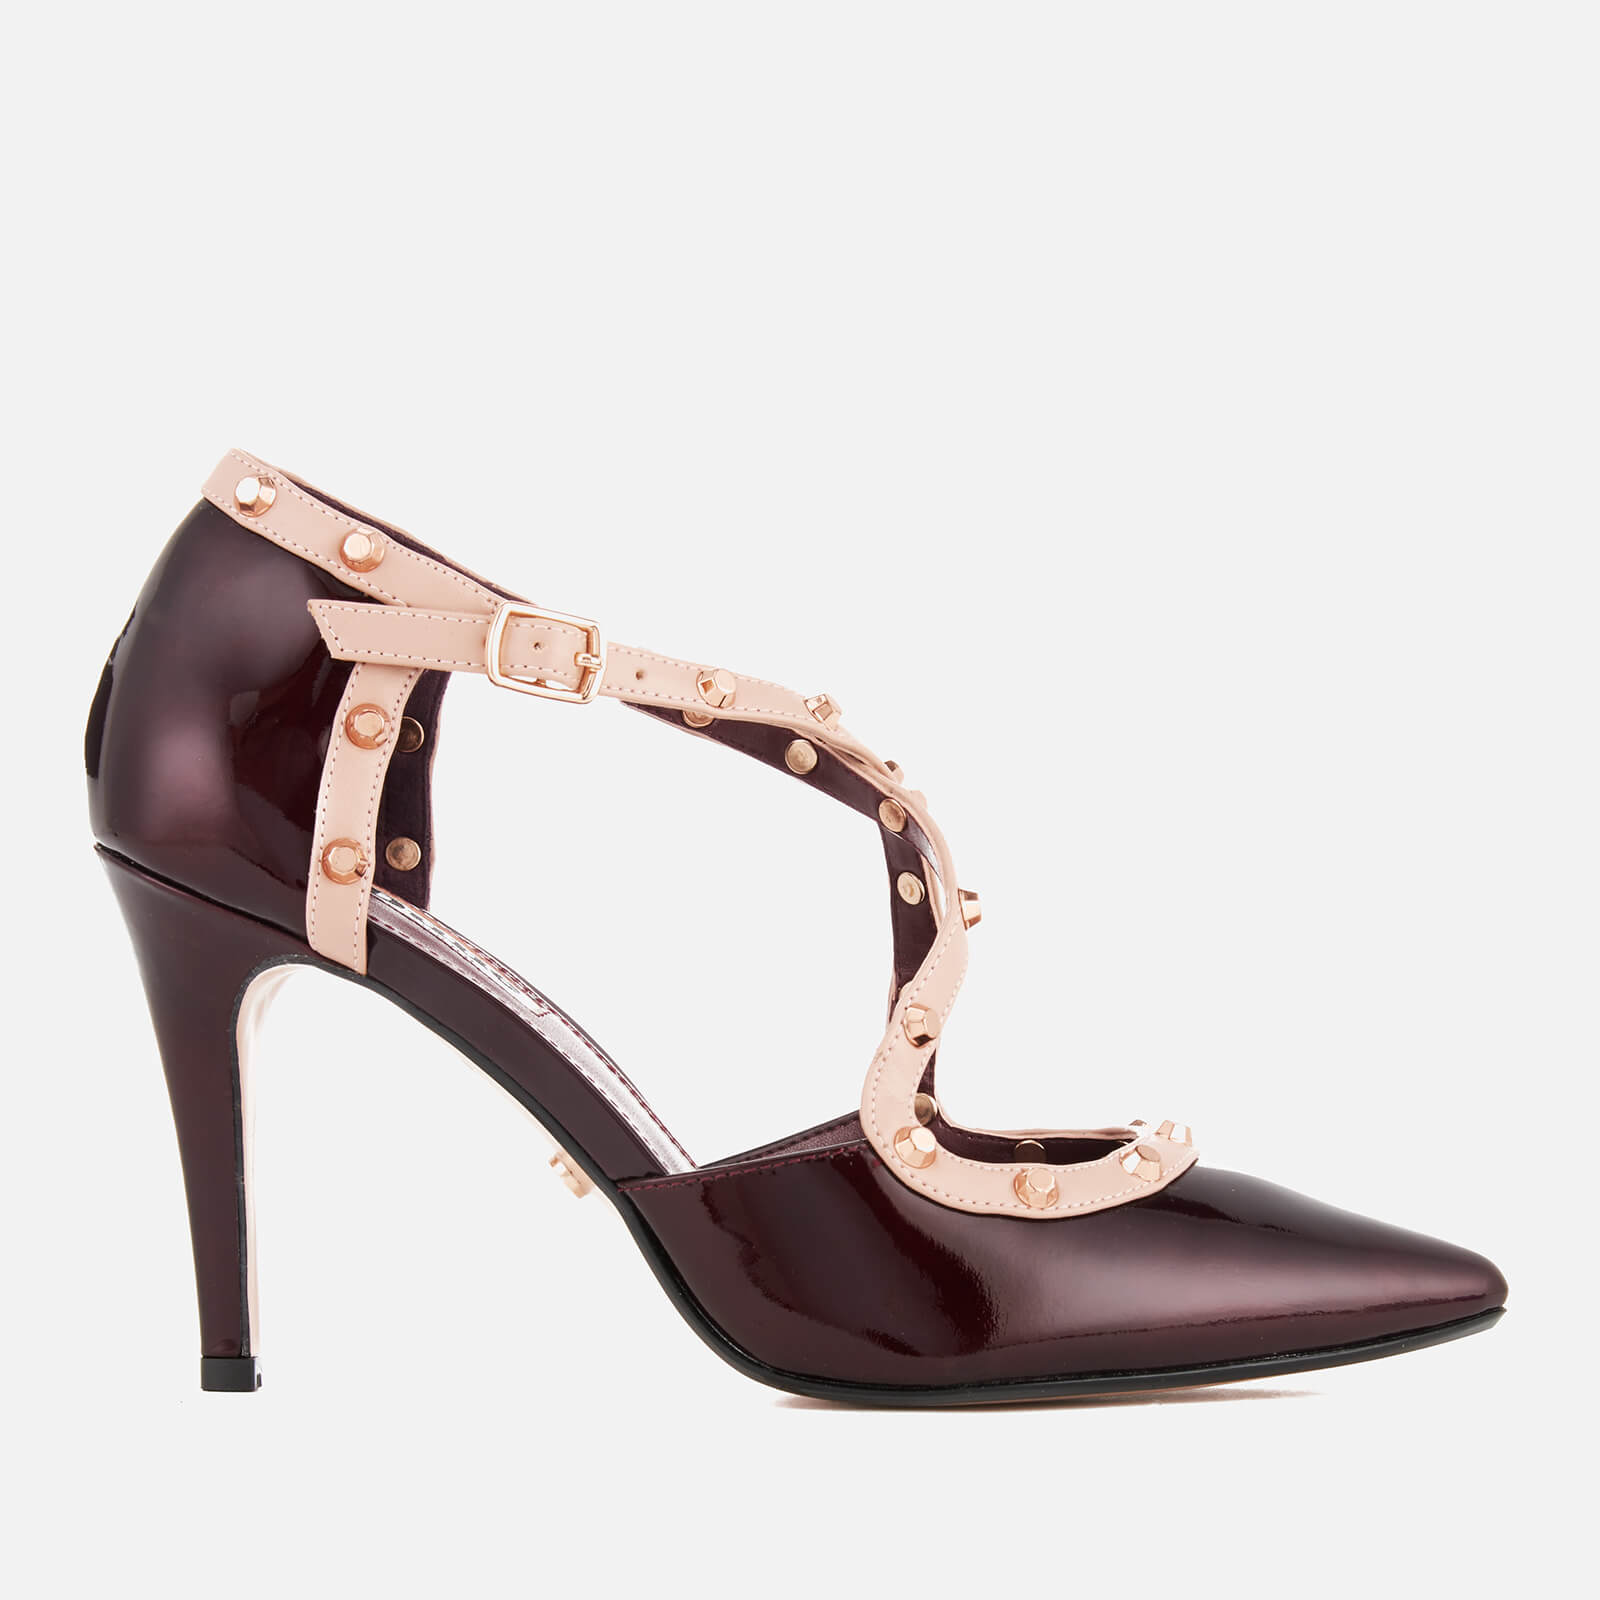 Dune Women's Cayleigh Patent Leather 